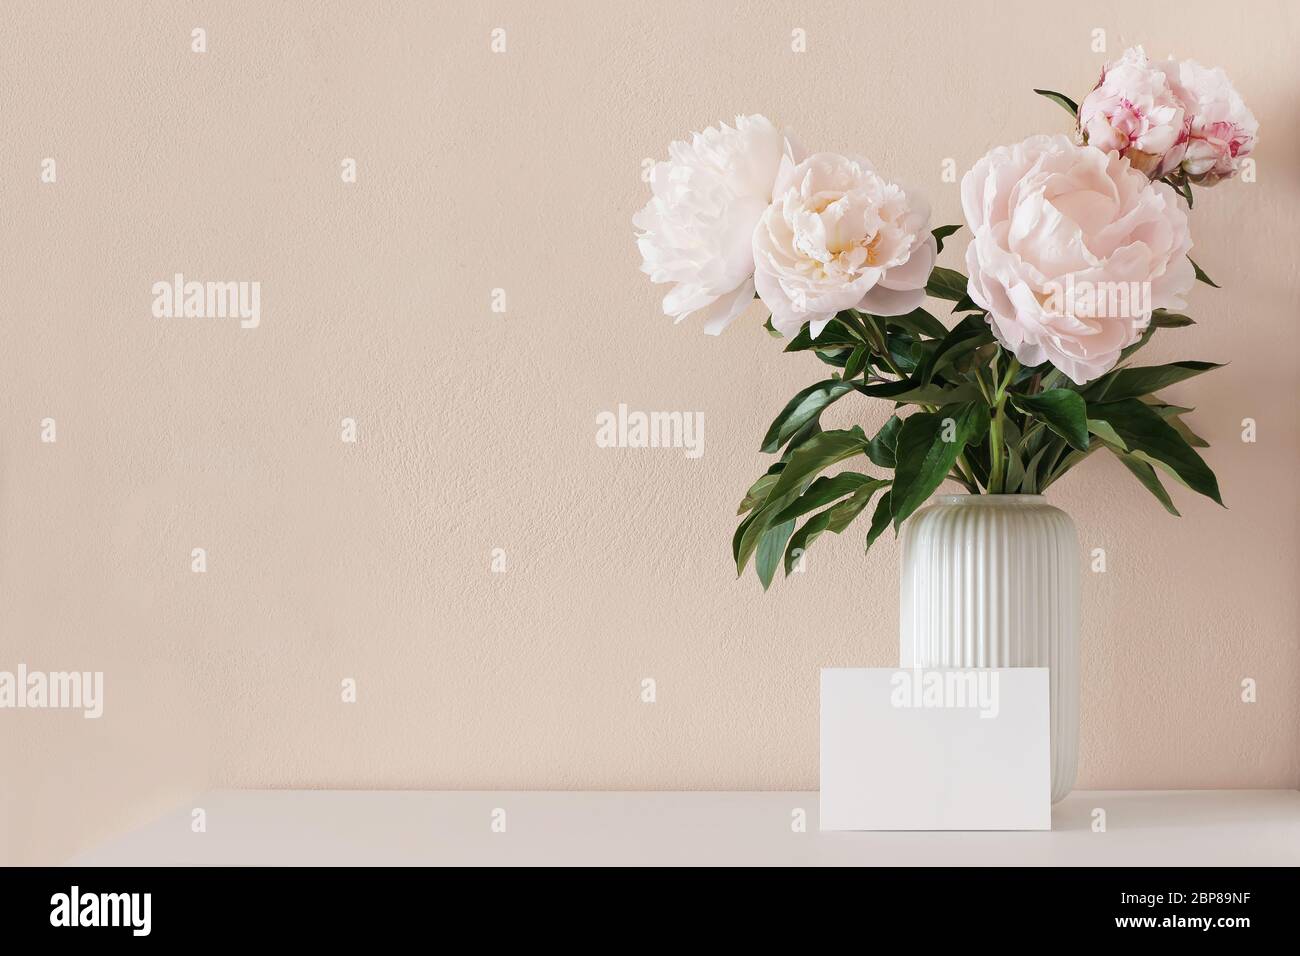 Spring, summer floral still life. Pink peony flowers bouquet in porcelain vase on white wooden table. Blank greeting card mockup scene. Nude wall back Stock Photo